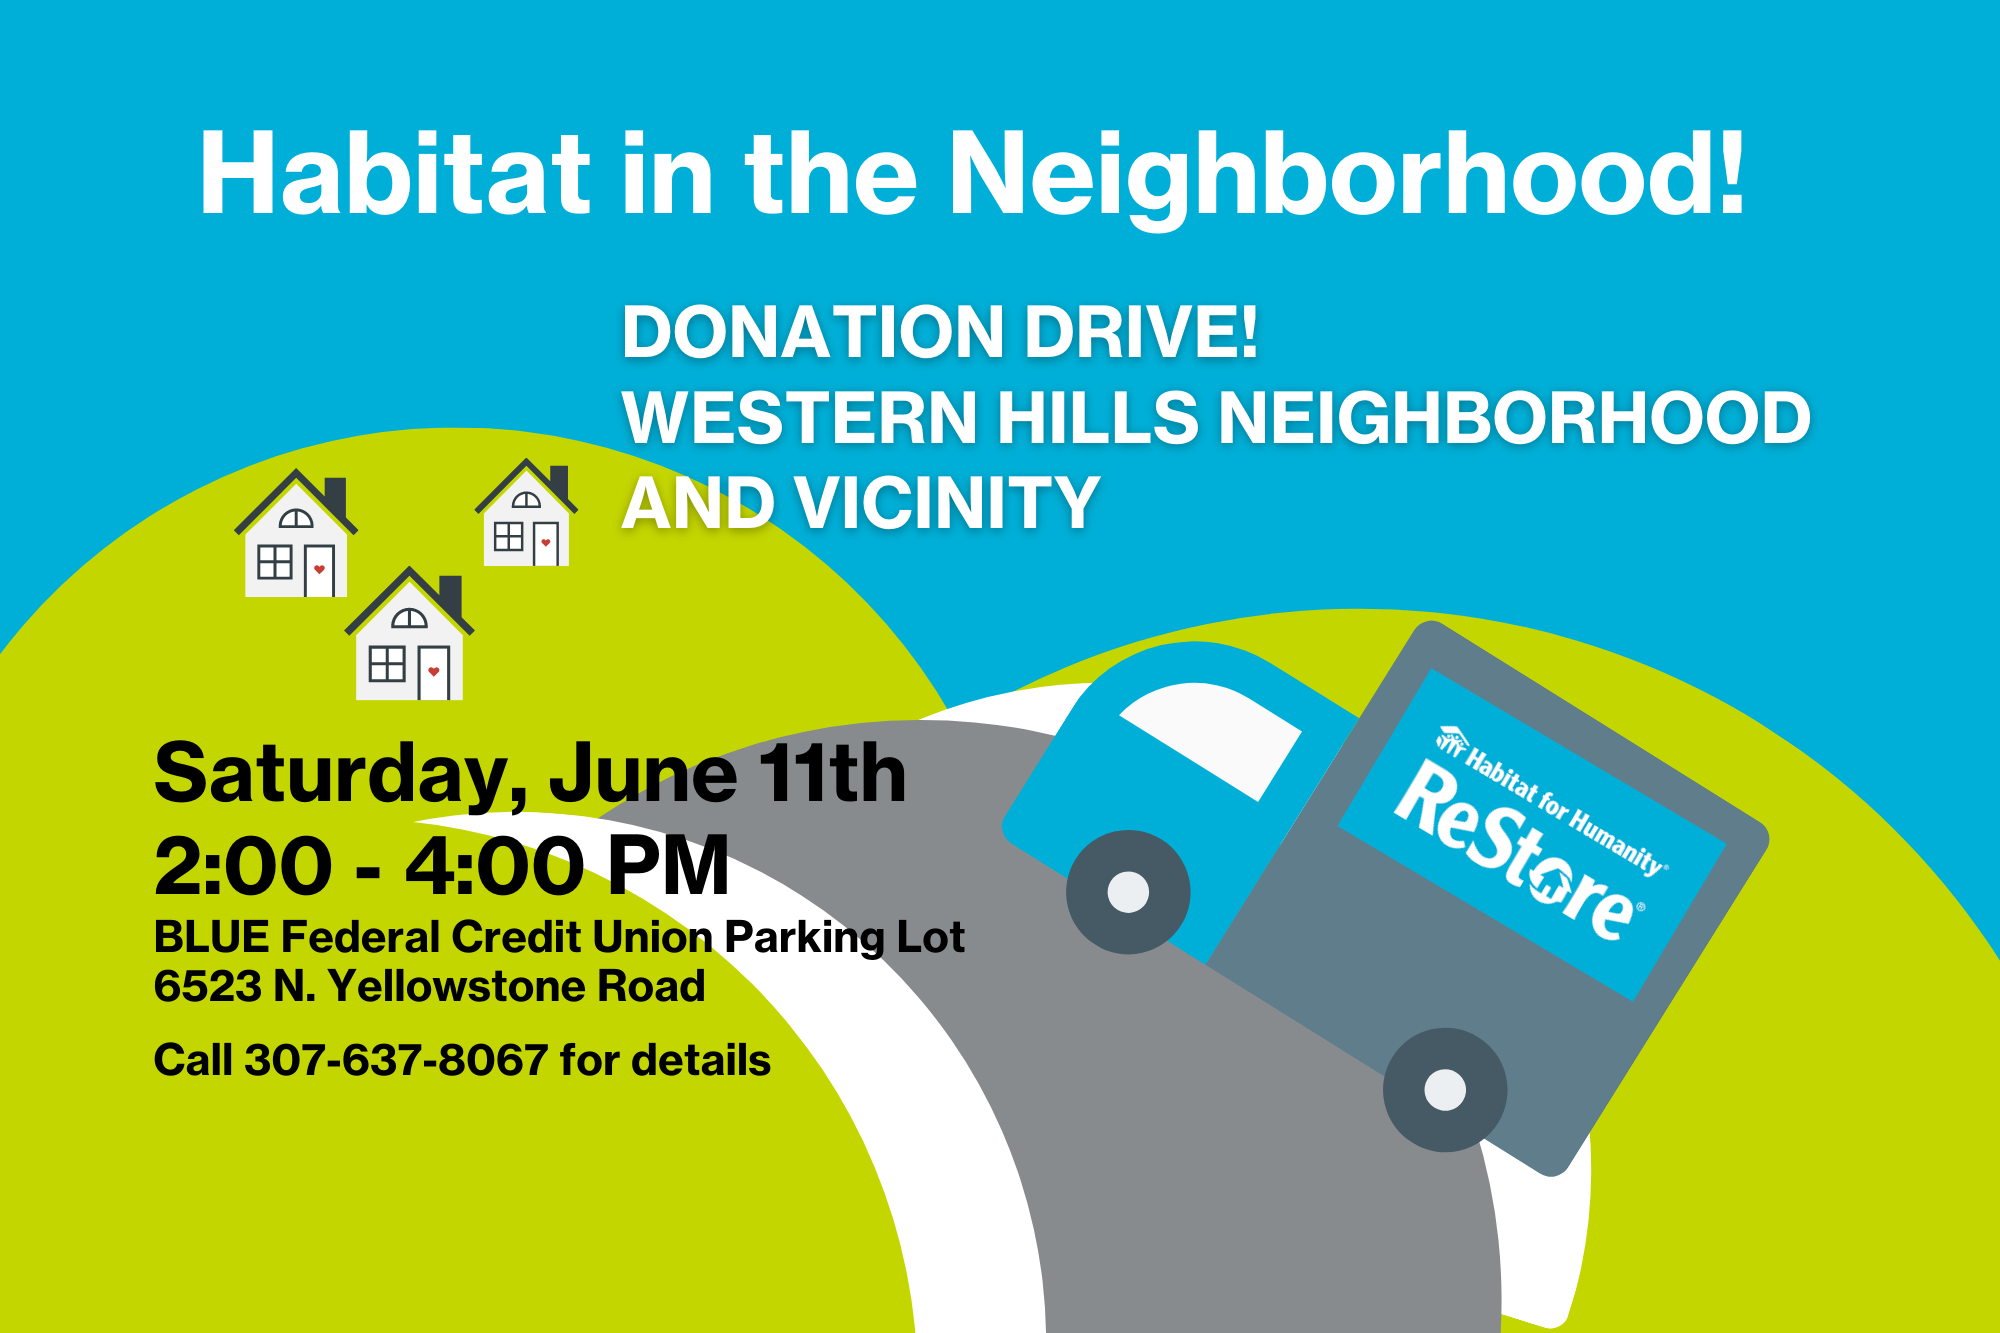 Habitat In The Neighborhood Donation Drive Will Be This Saturday!